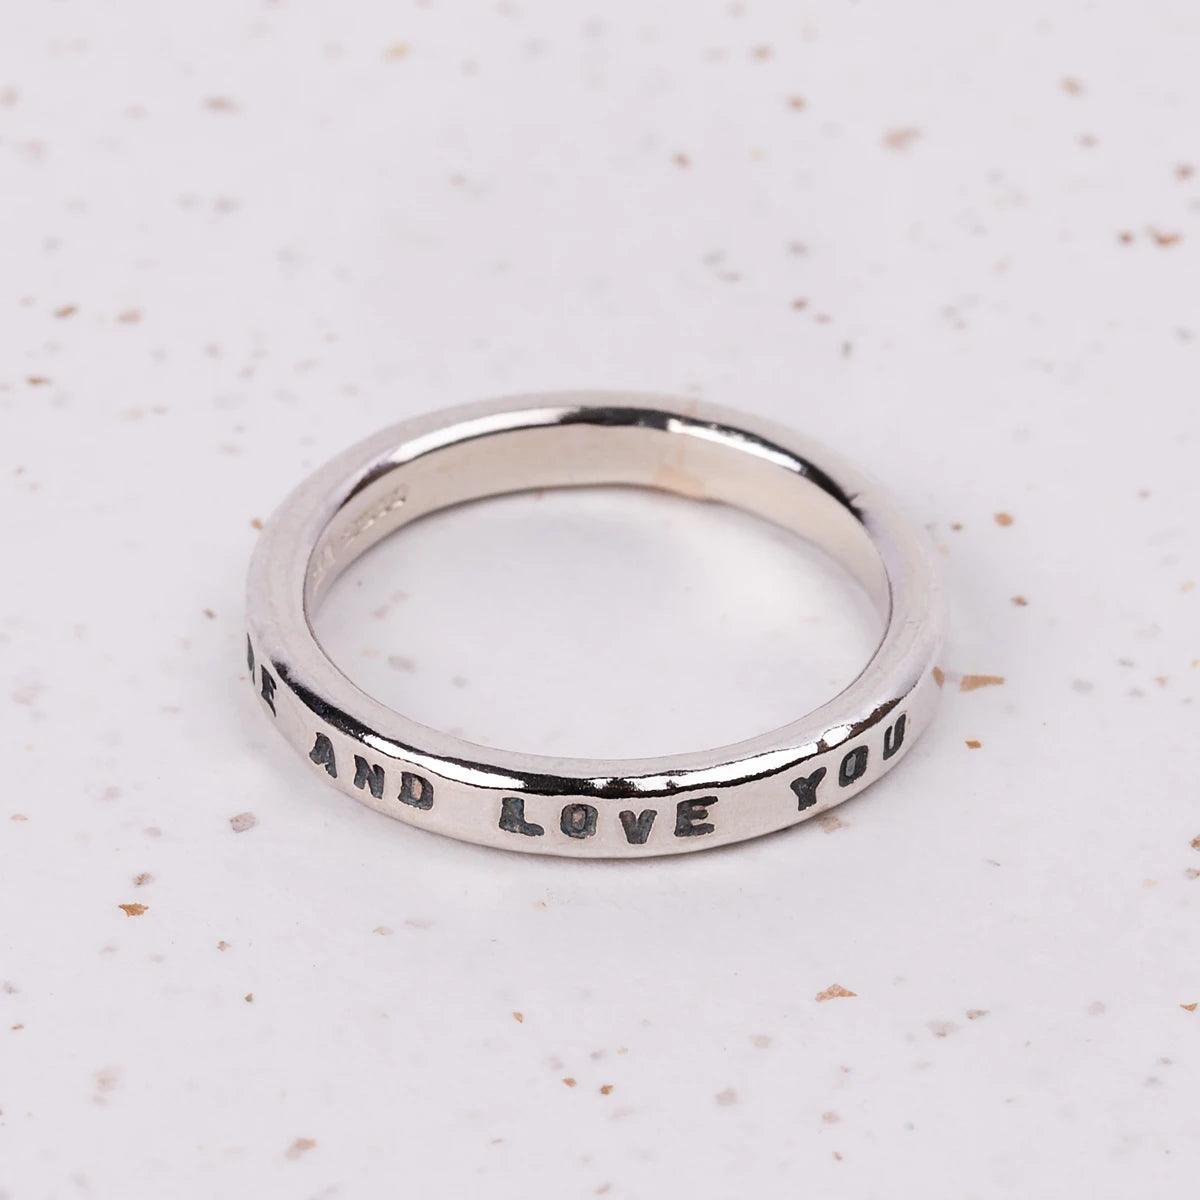 Jane Austen "I admire and love you" Quote Ring